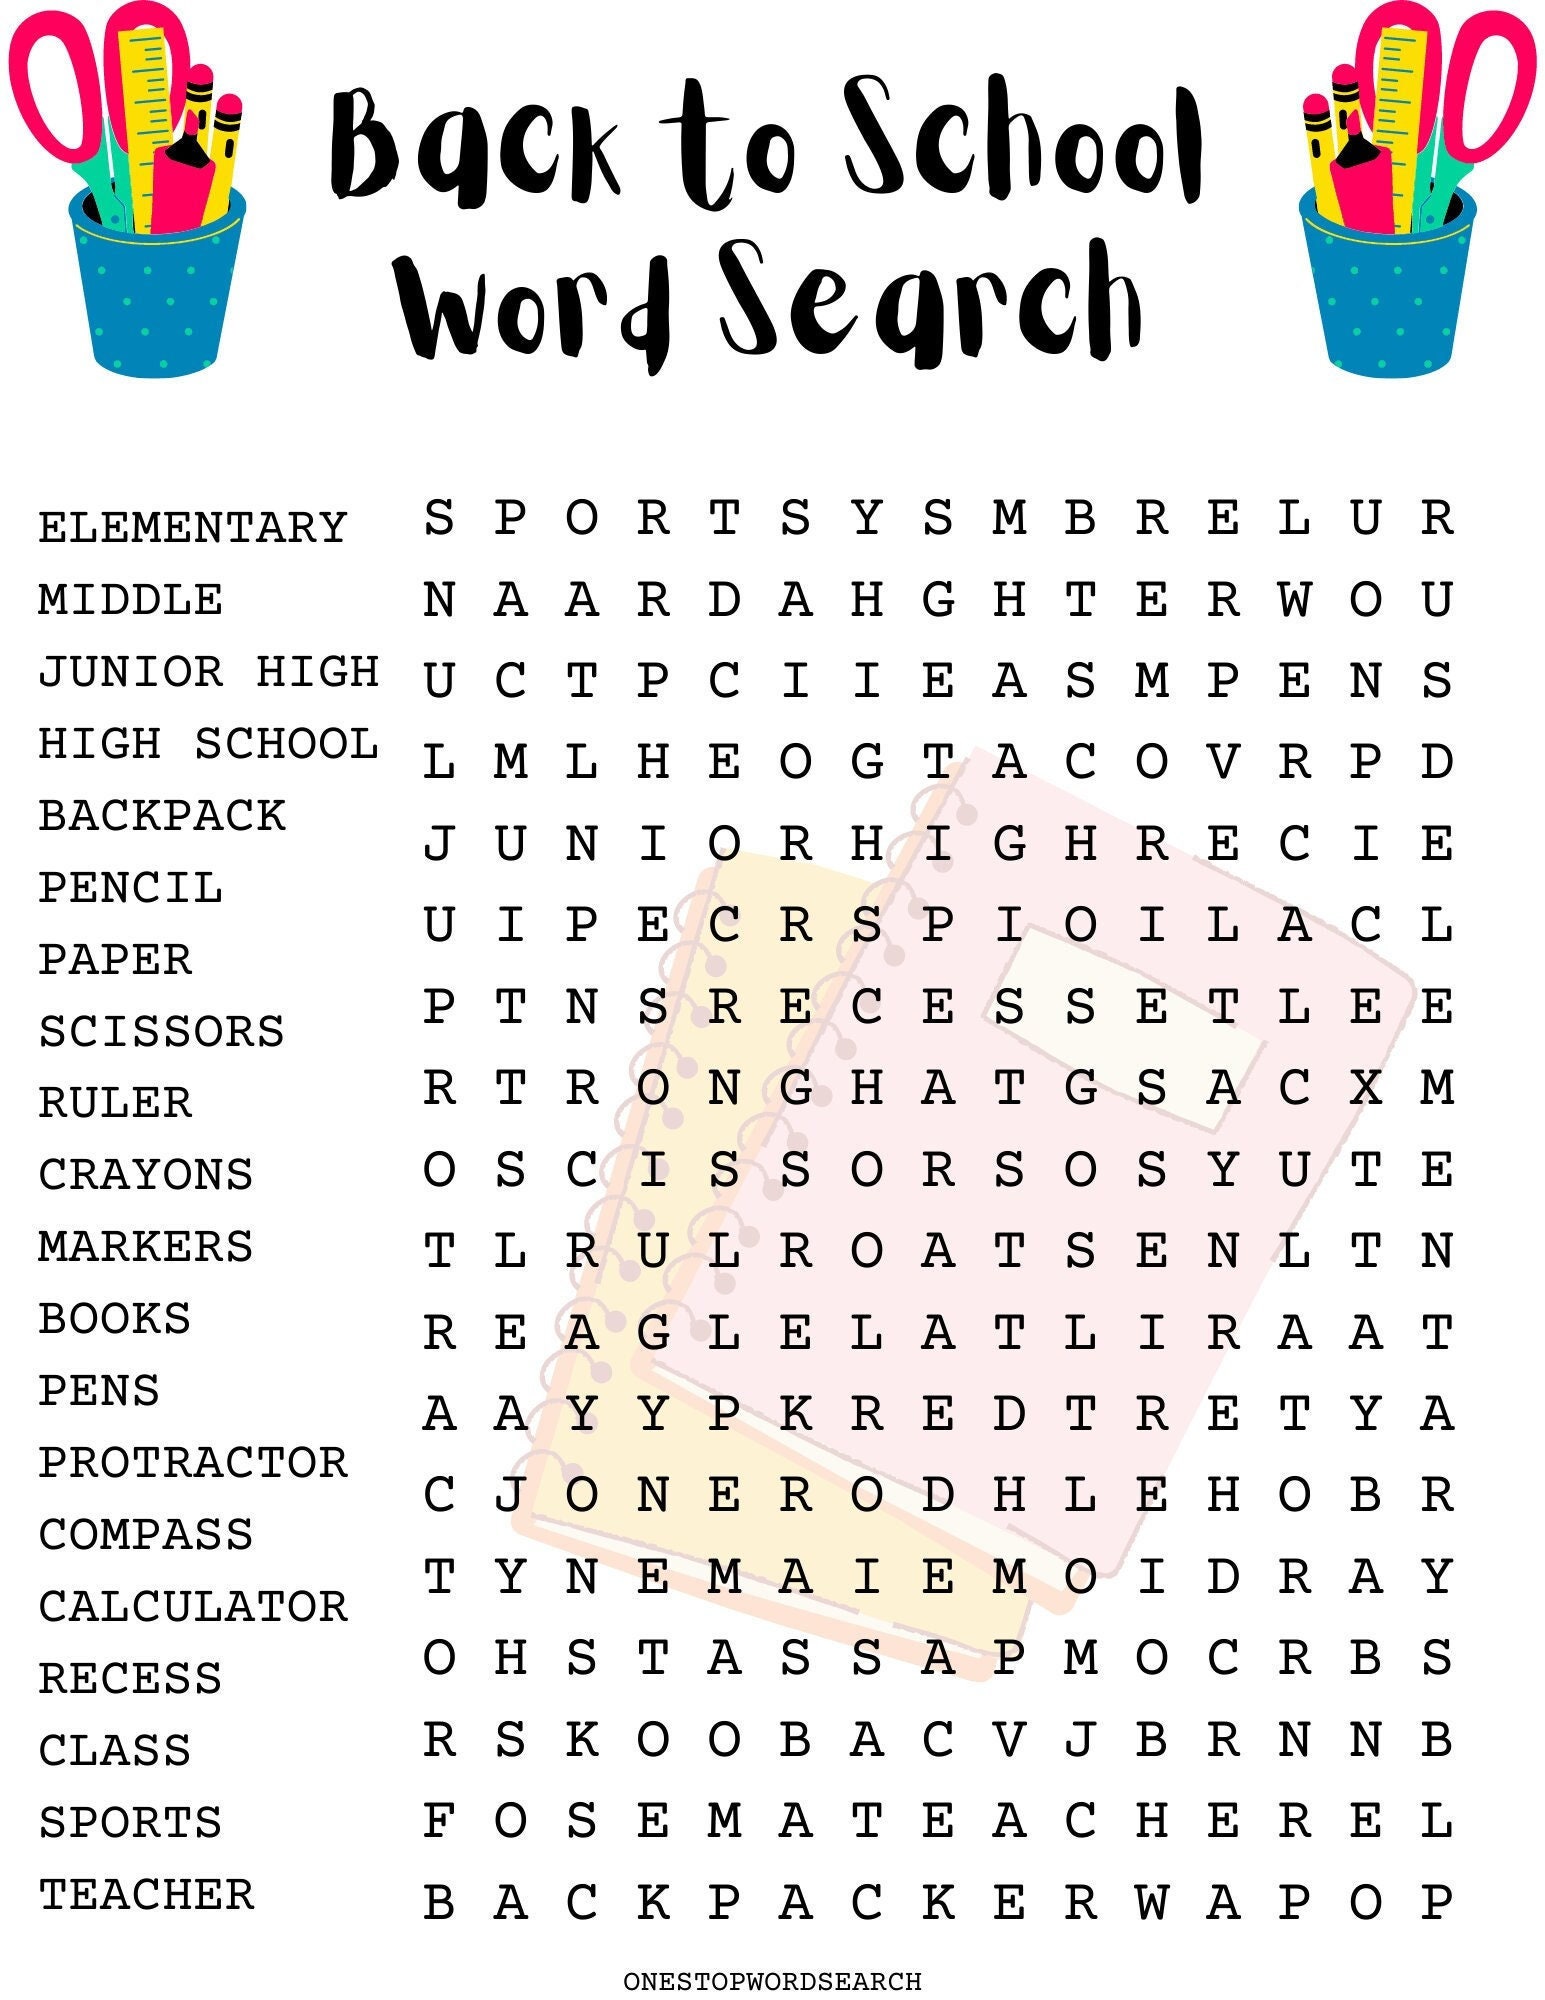 back-to-school-word-search-puzzle-with-answer-sheet-family-etsy